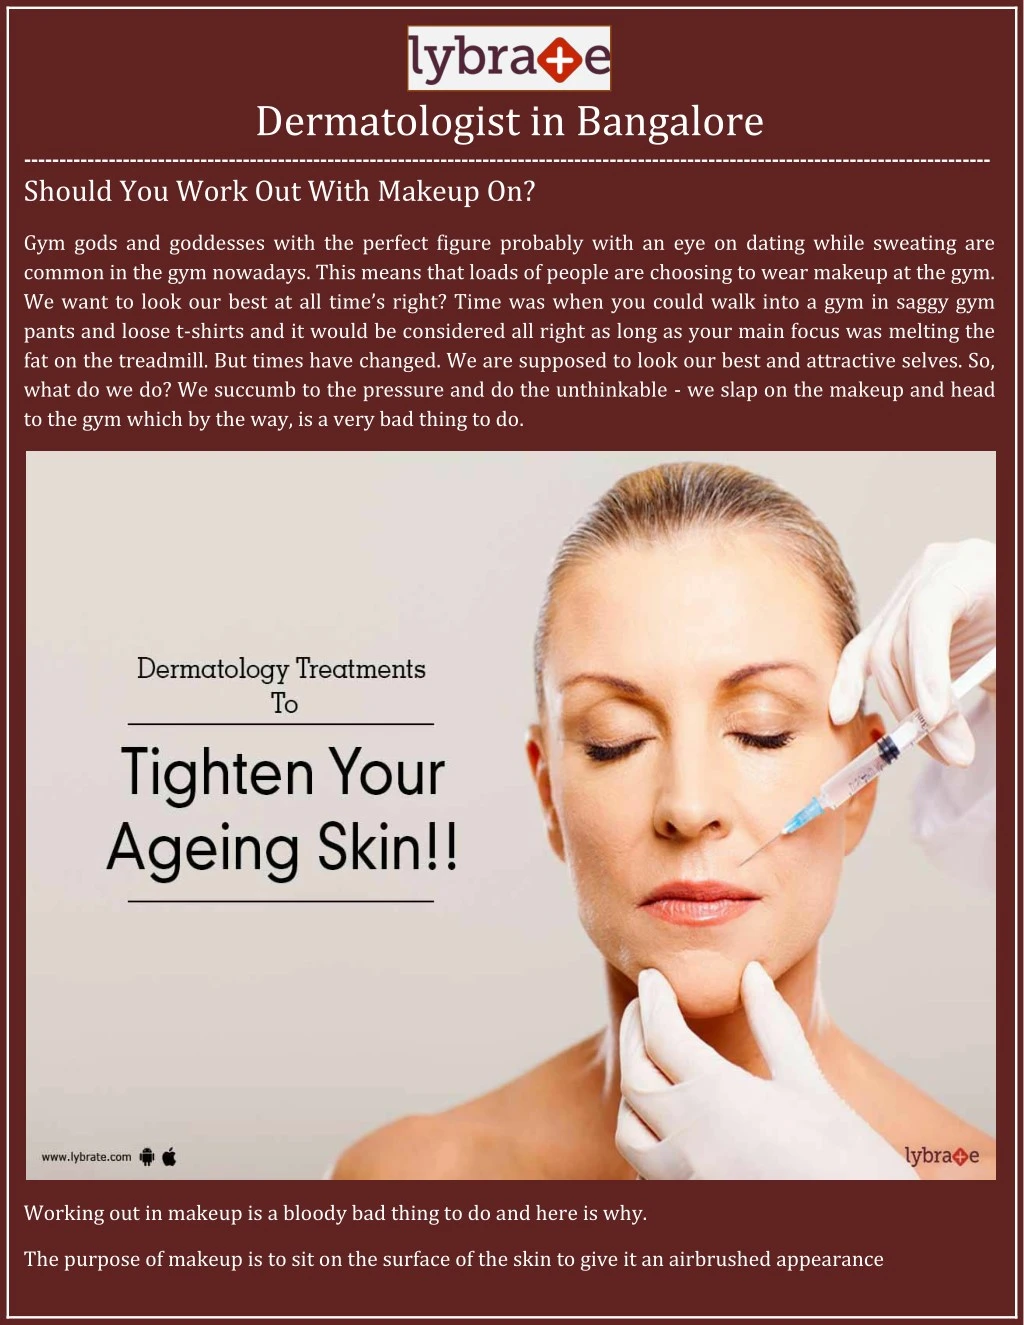 dermatologist in bangalore should you work